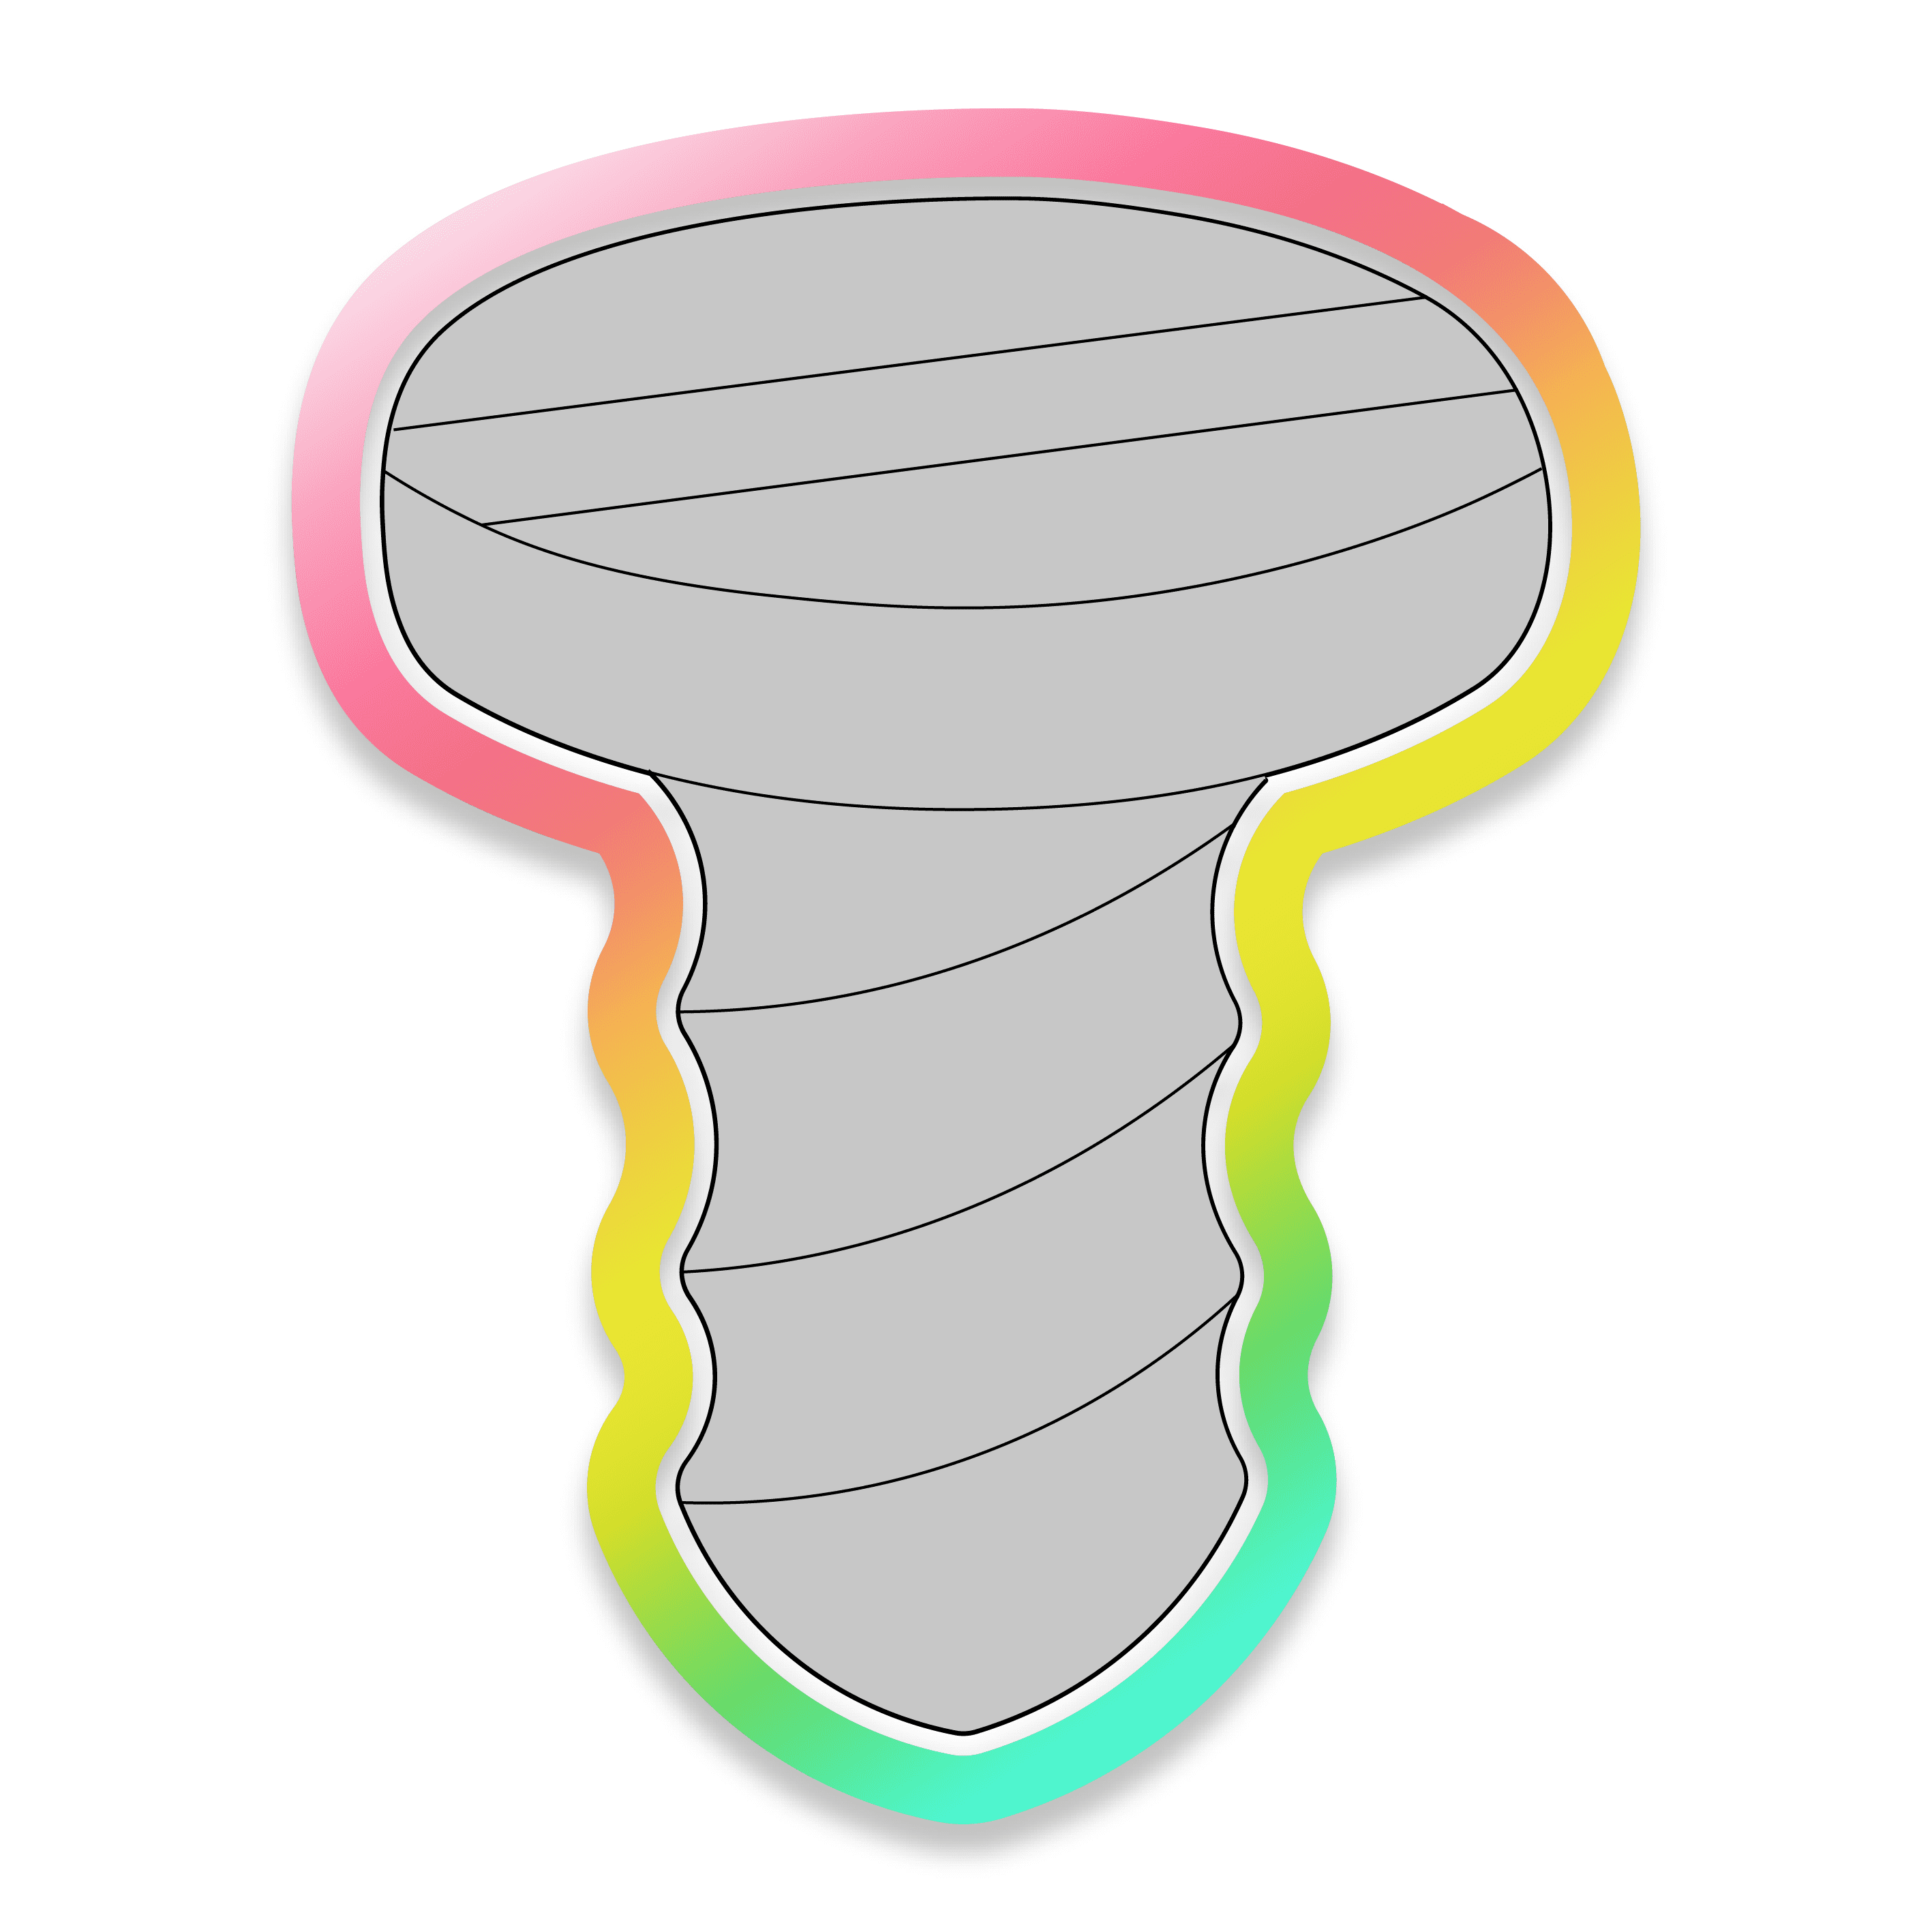 Digital Drawing of a Gray Screw Cookie Cutter